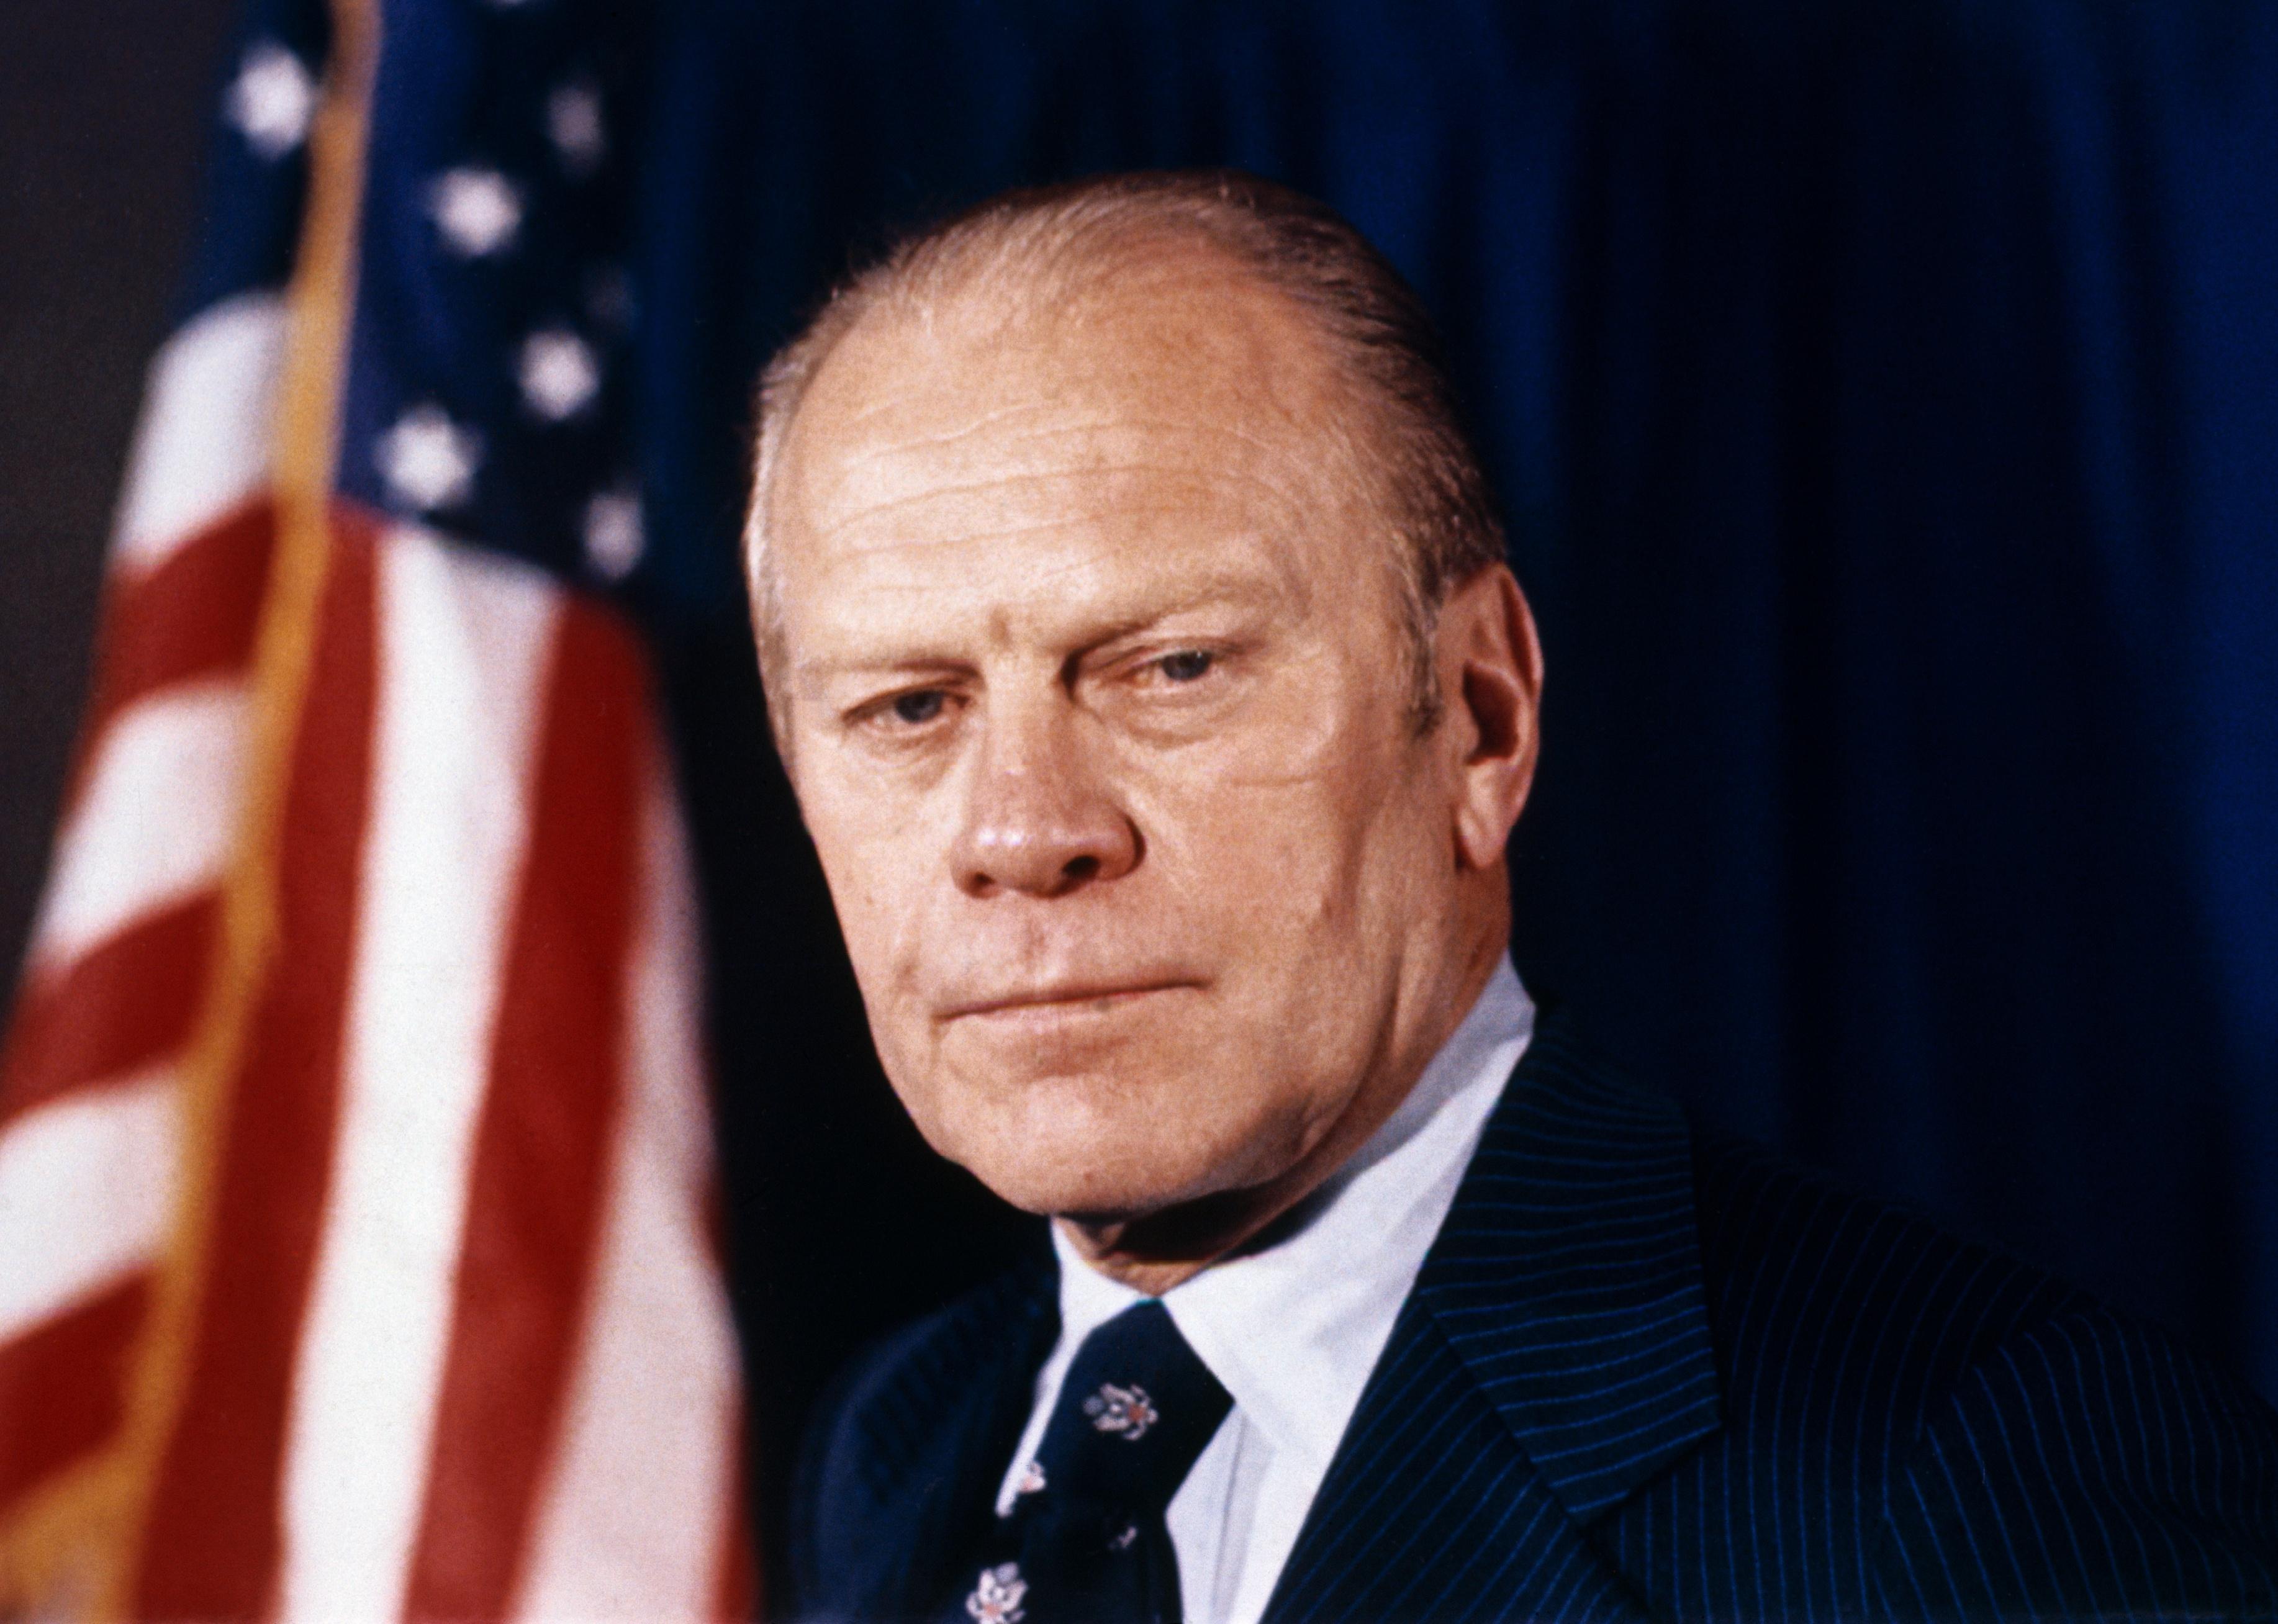 Gerald Ford looking serious in front of an American flag.